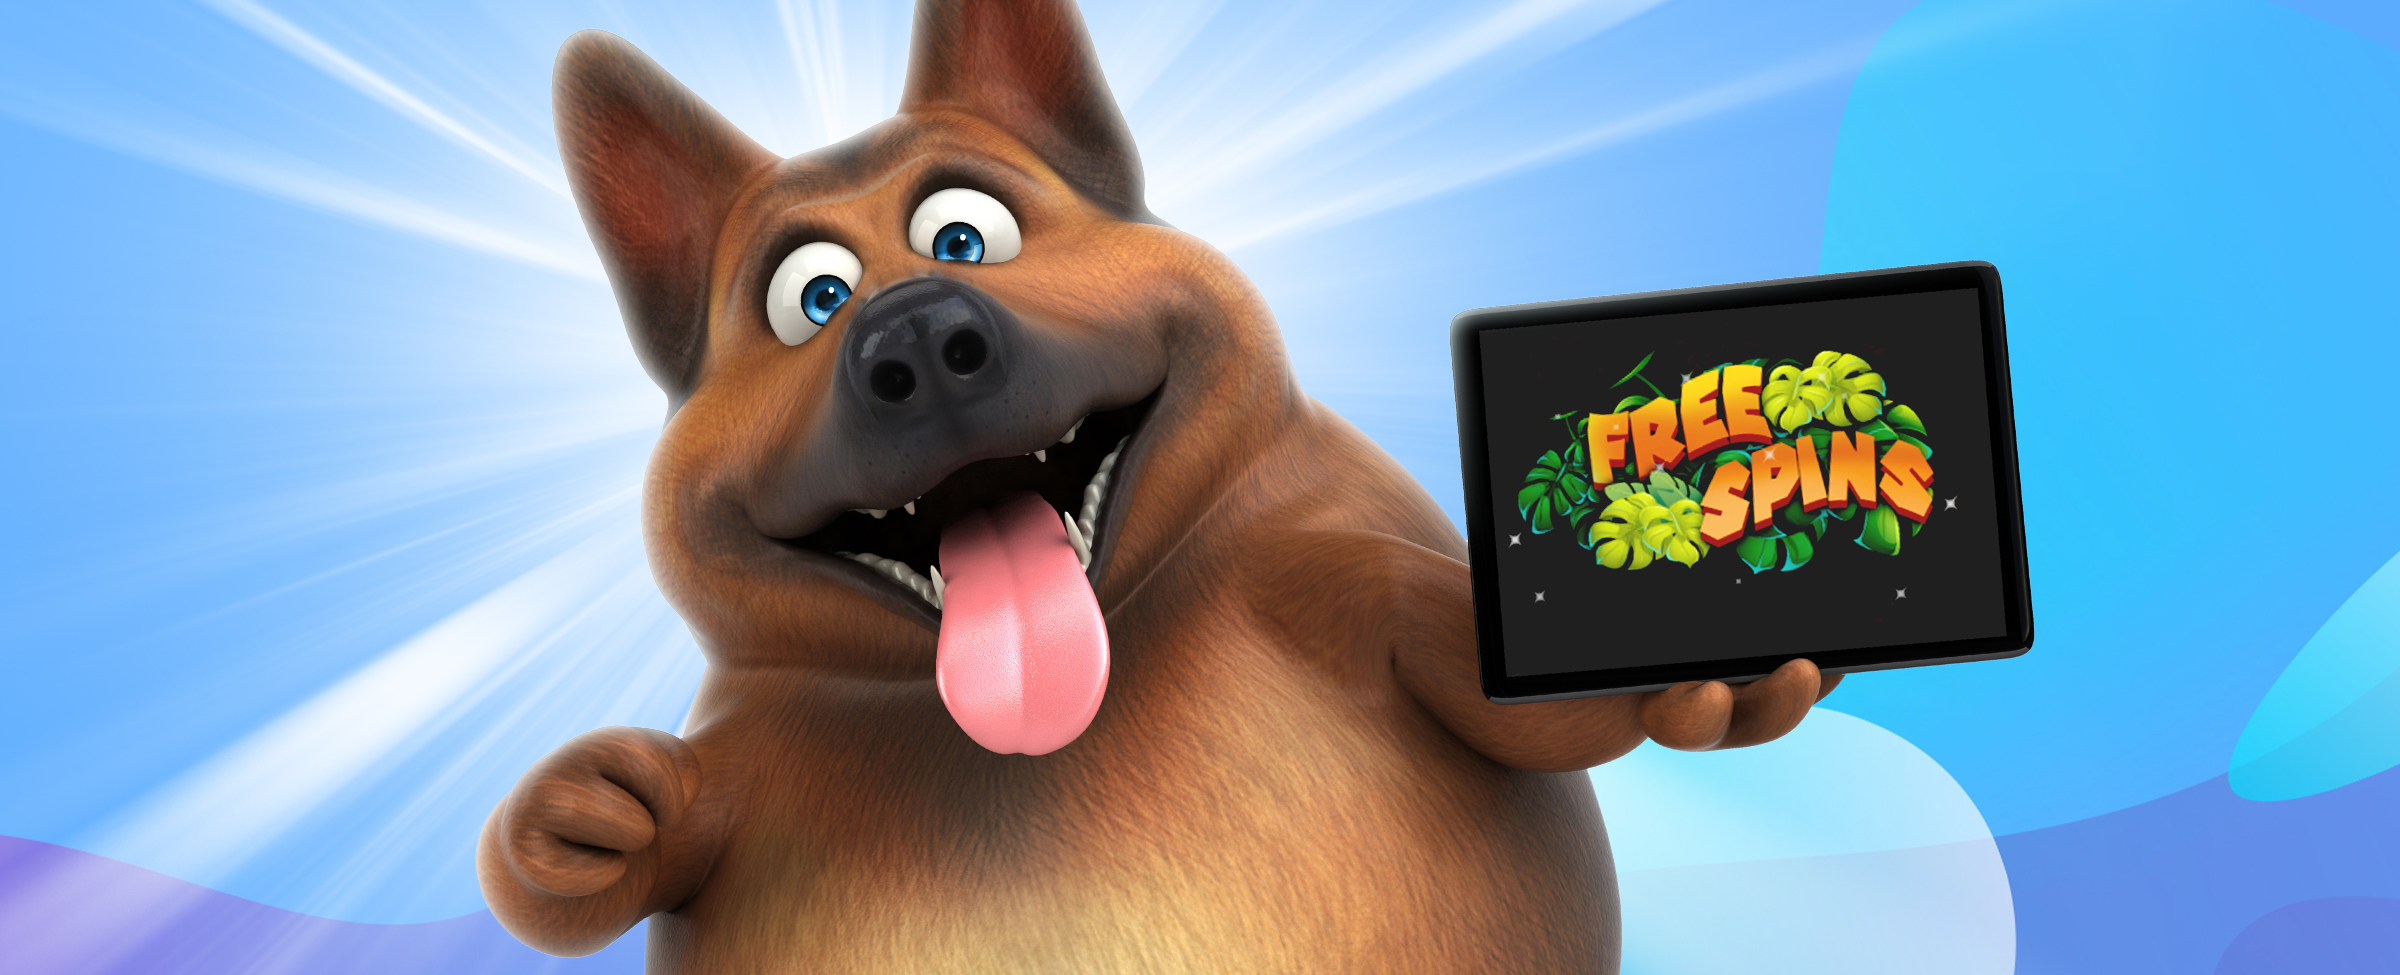 A chubby 3D-animated dog is seen from the waist up in the center of the image, with its tongue hanging out and eyes wide open. In its left hand is an iPad, featuring a black screen with orange words that read Free Spins, in front of green tropical ferns.